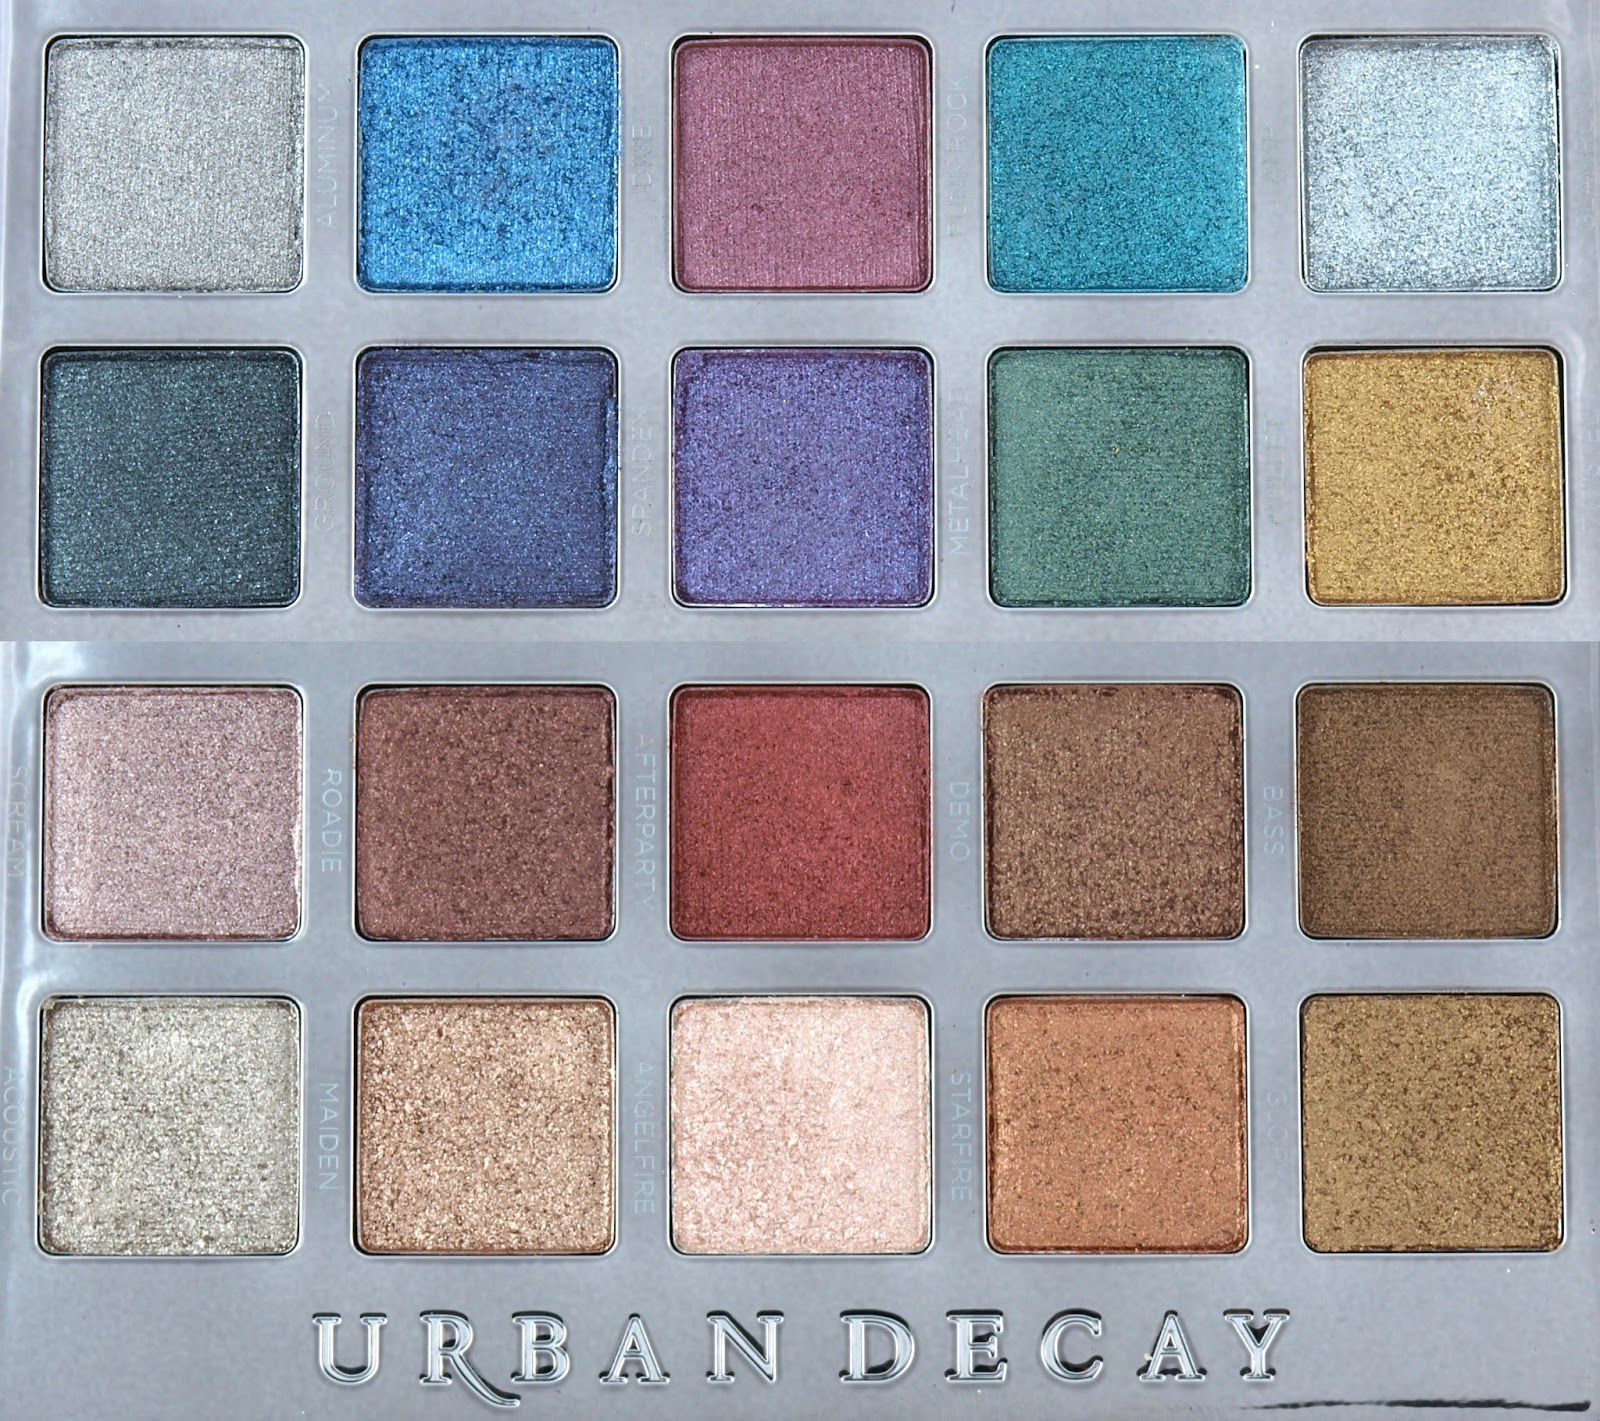 Urban Decay Heavy Metals Metallic Eyeshadow Palette: Review and Swatches